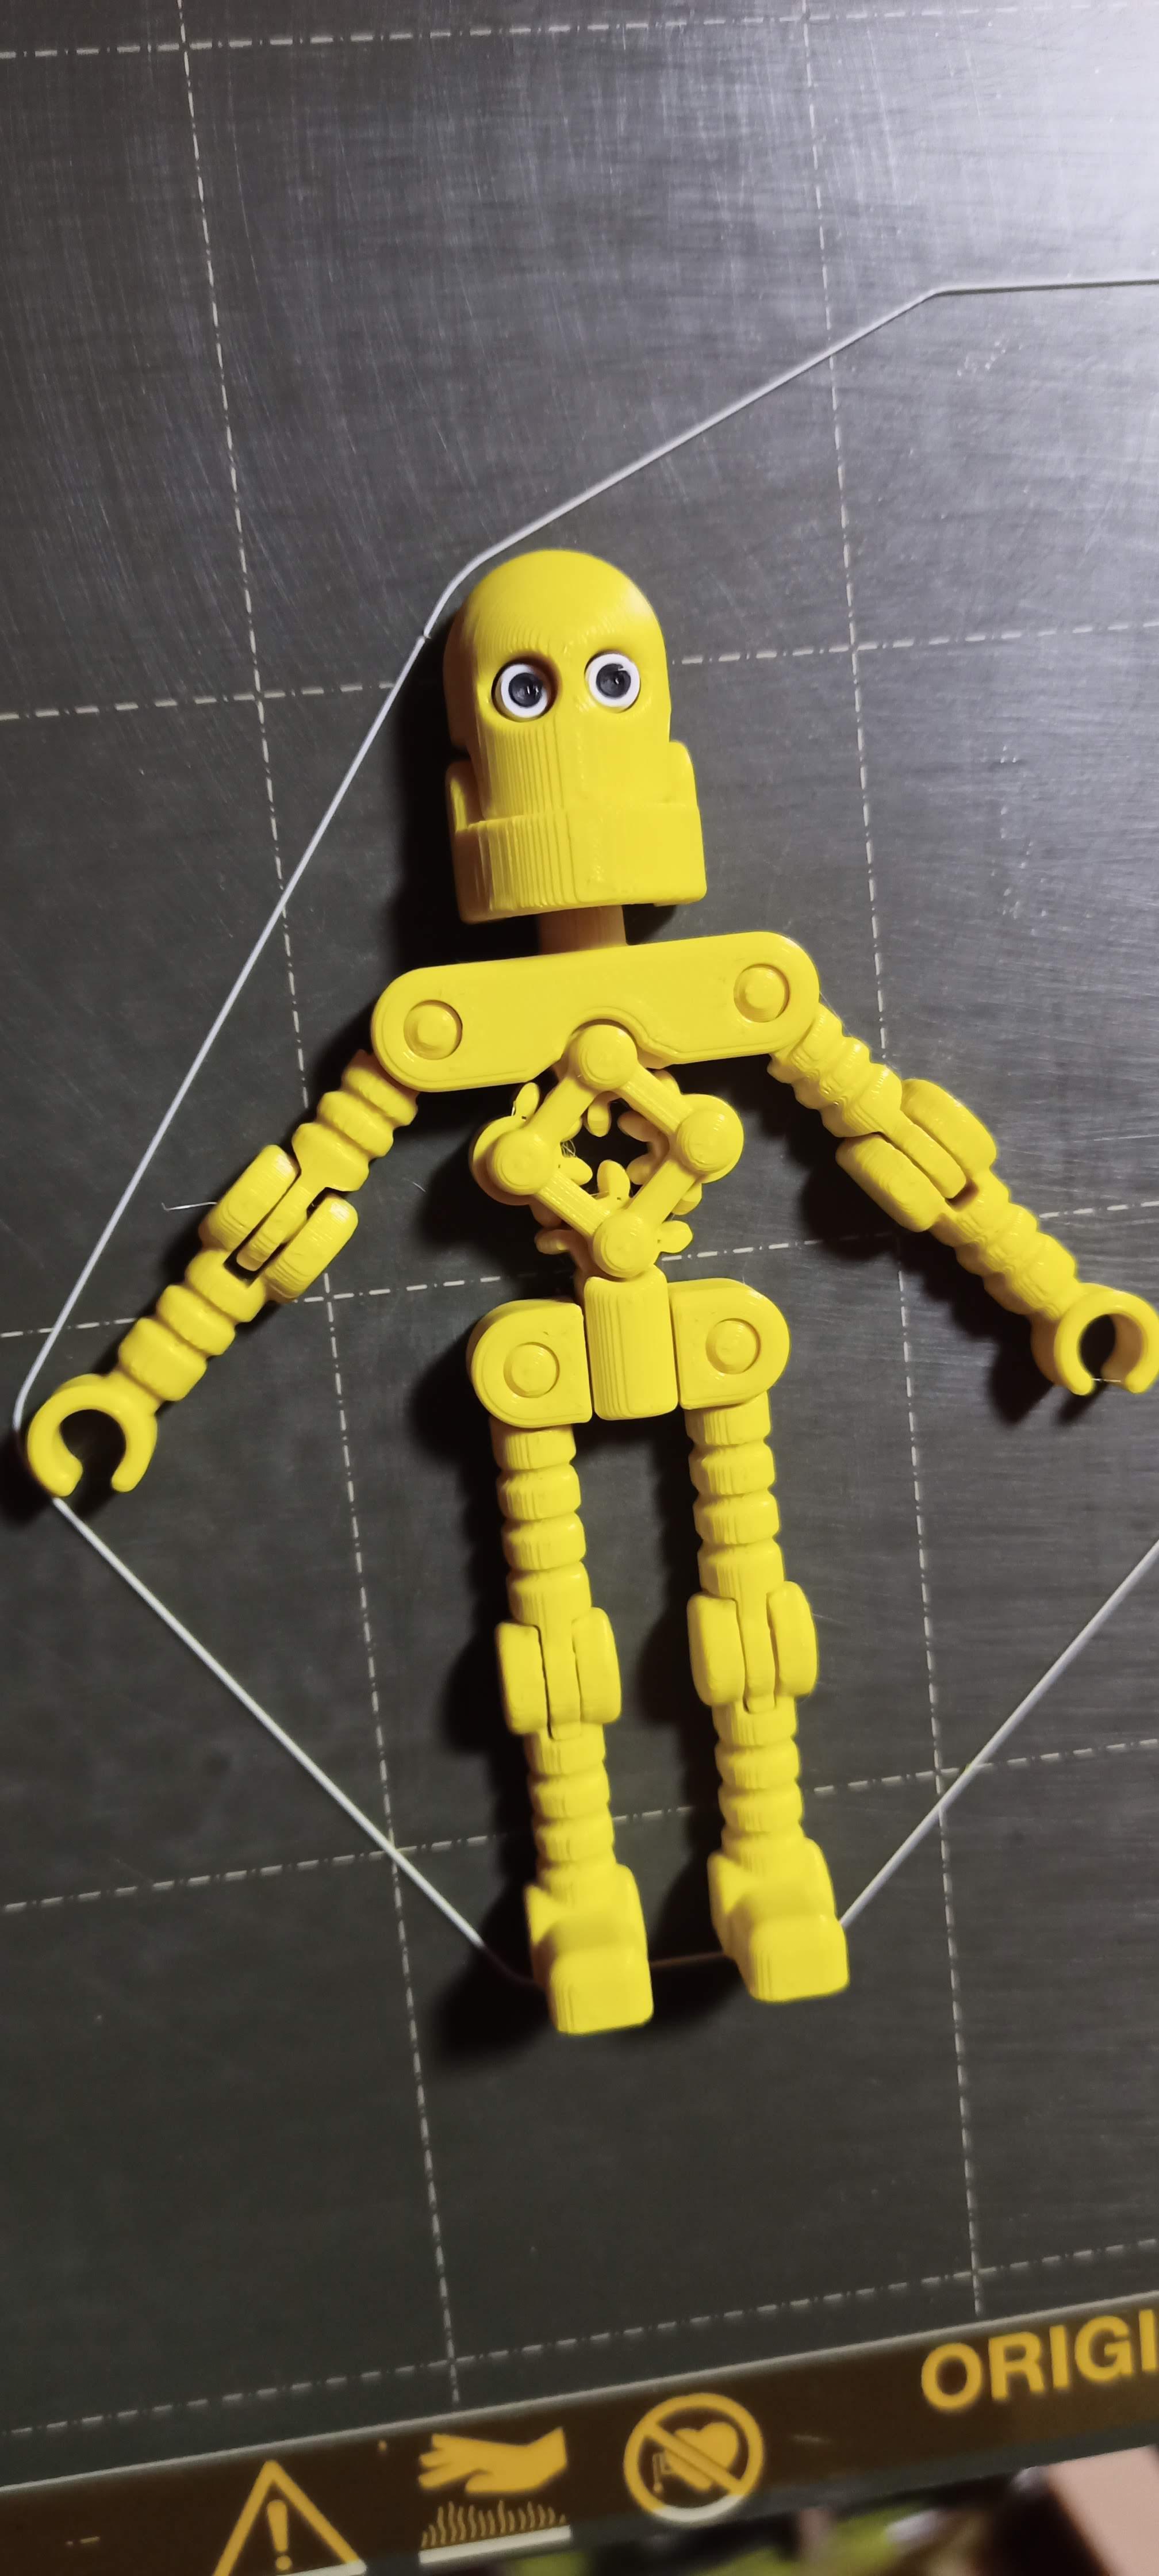 Benchmark Bot - My son looooves it, already started number 2!
Weakest are the little gear on the back, one already popped off but it's fine anyway. - 3d model